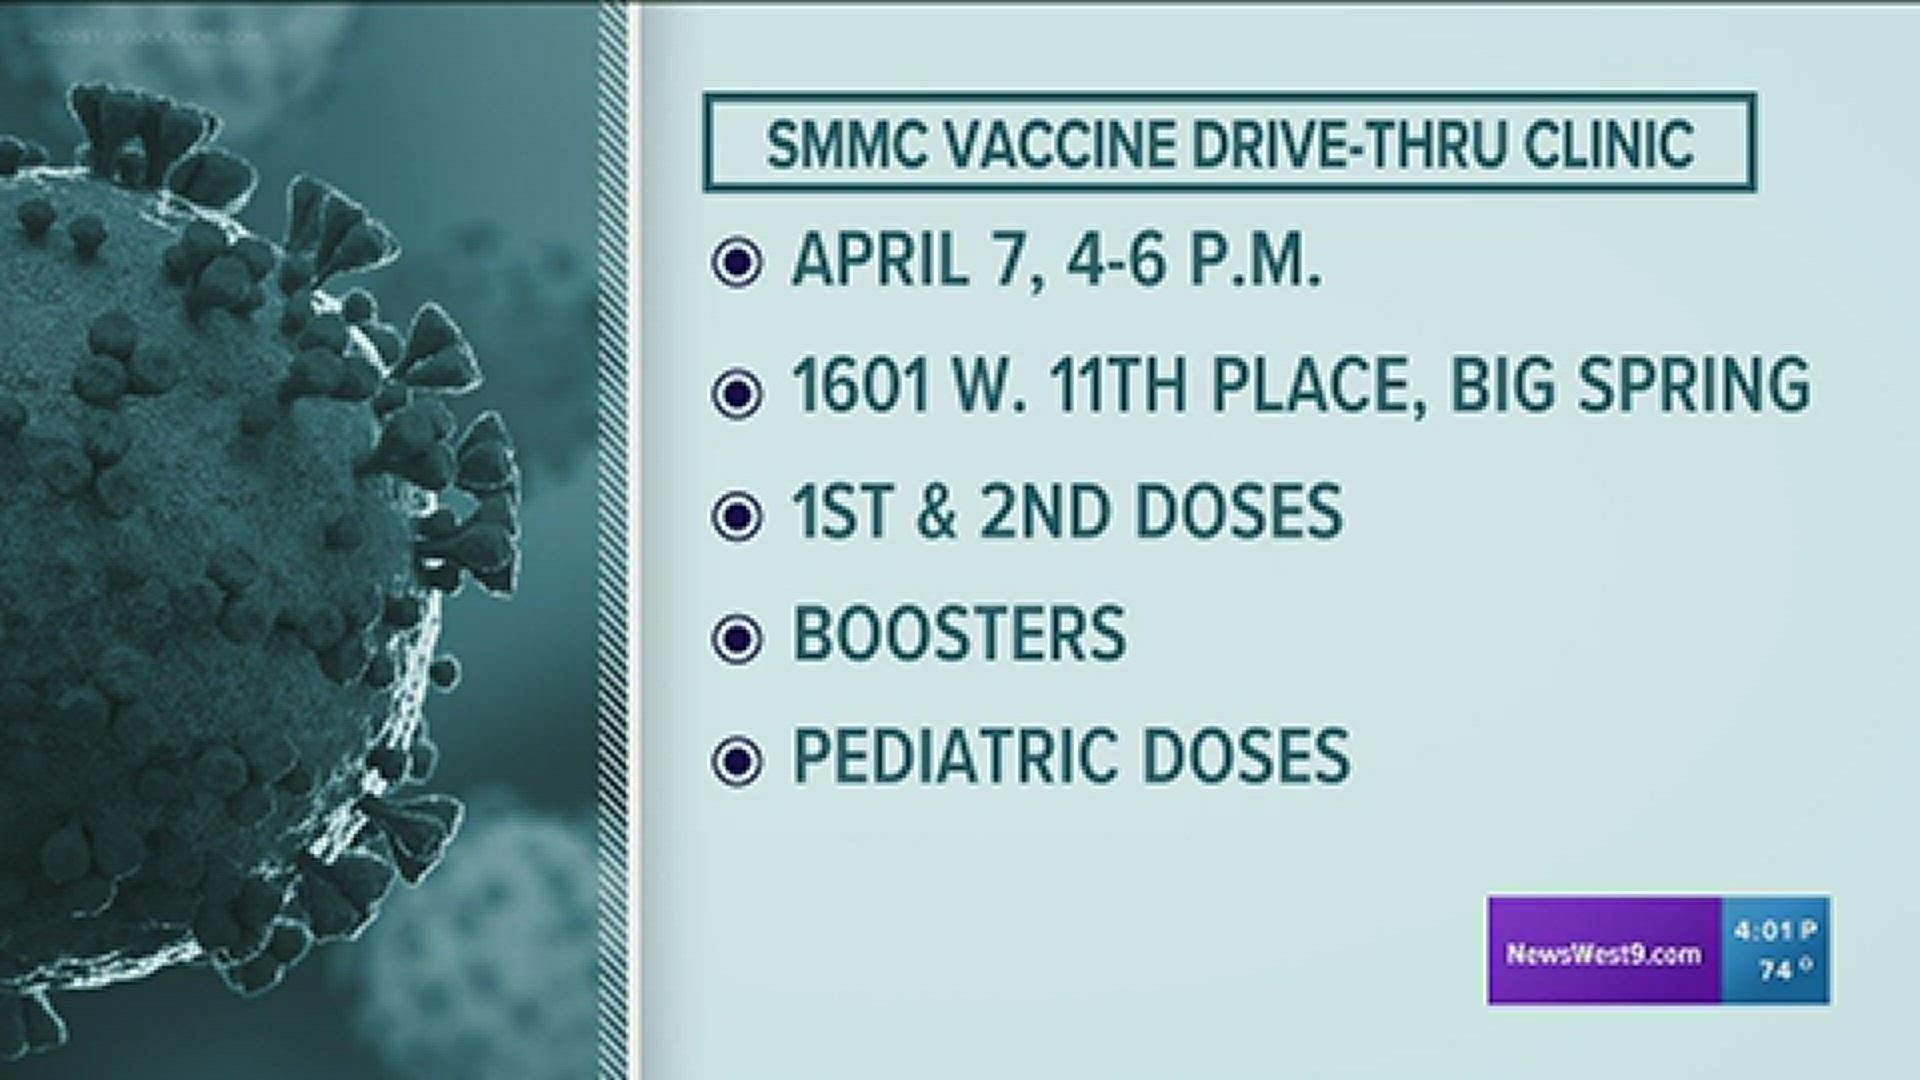 First, second, booster and pediatric vaccine doses will be available.